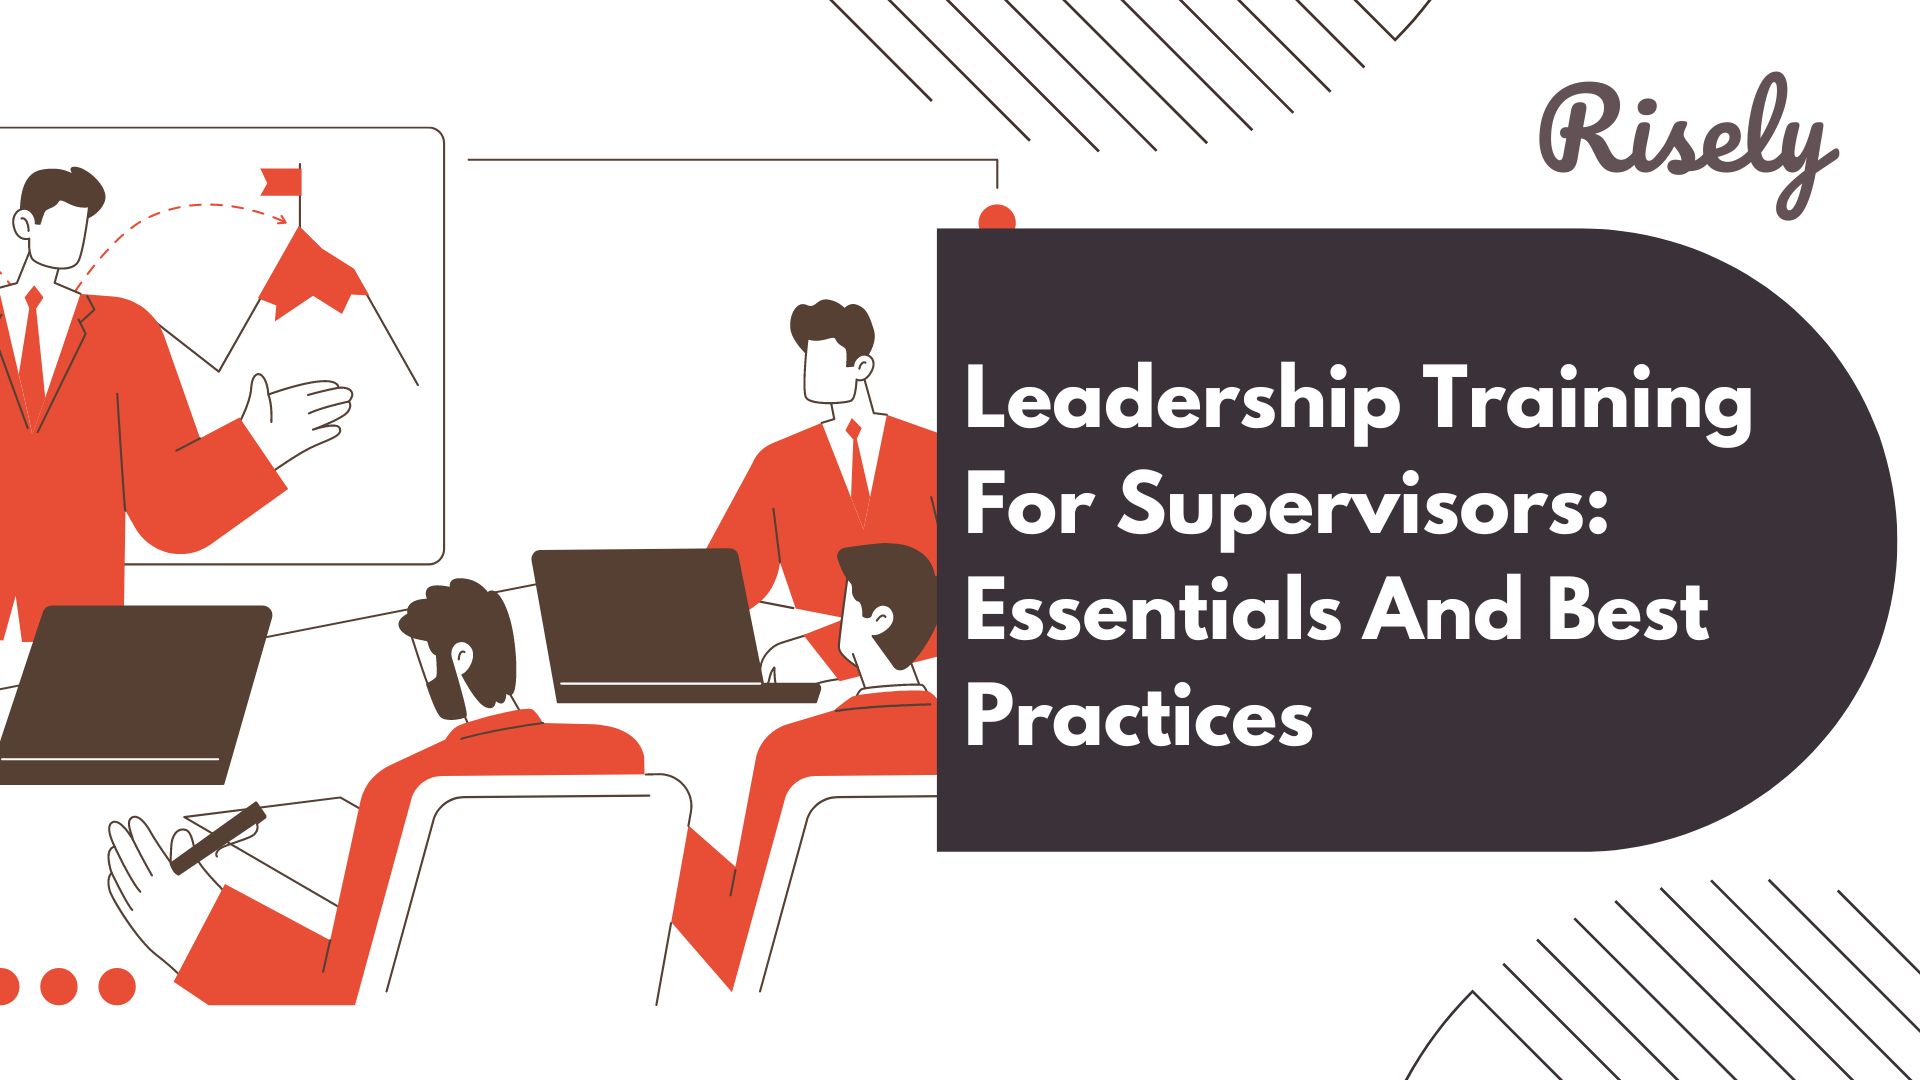 Leadership Training For Supervisors: Essentials And Best Practices